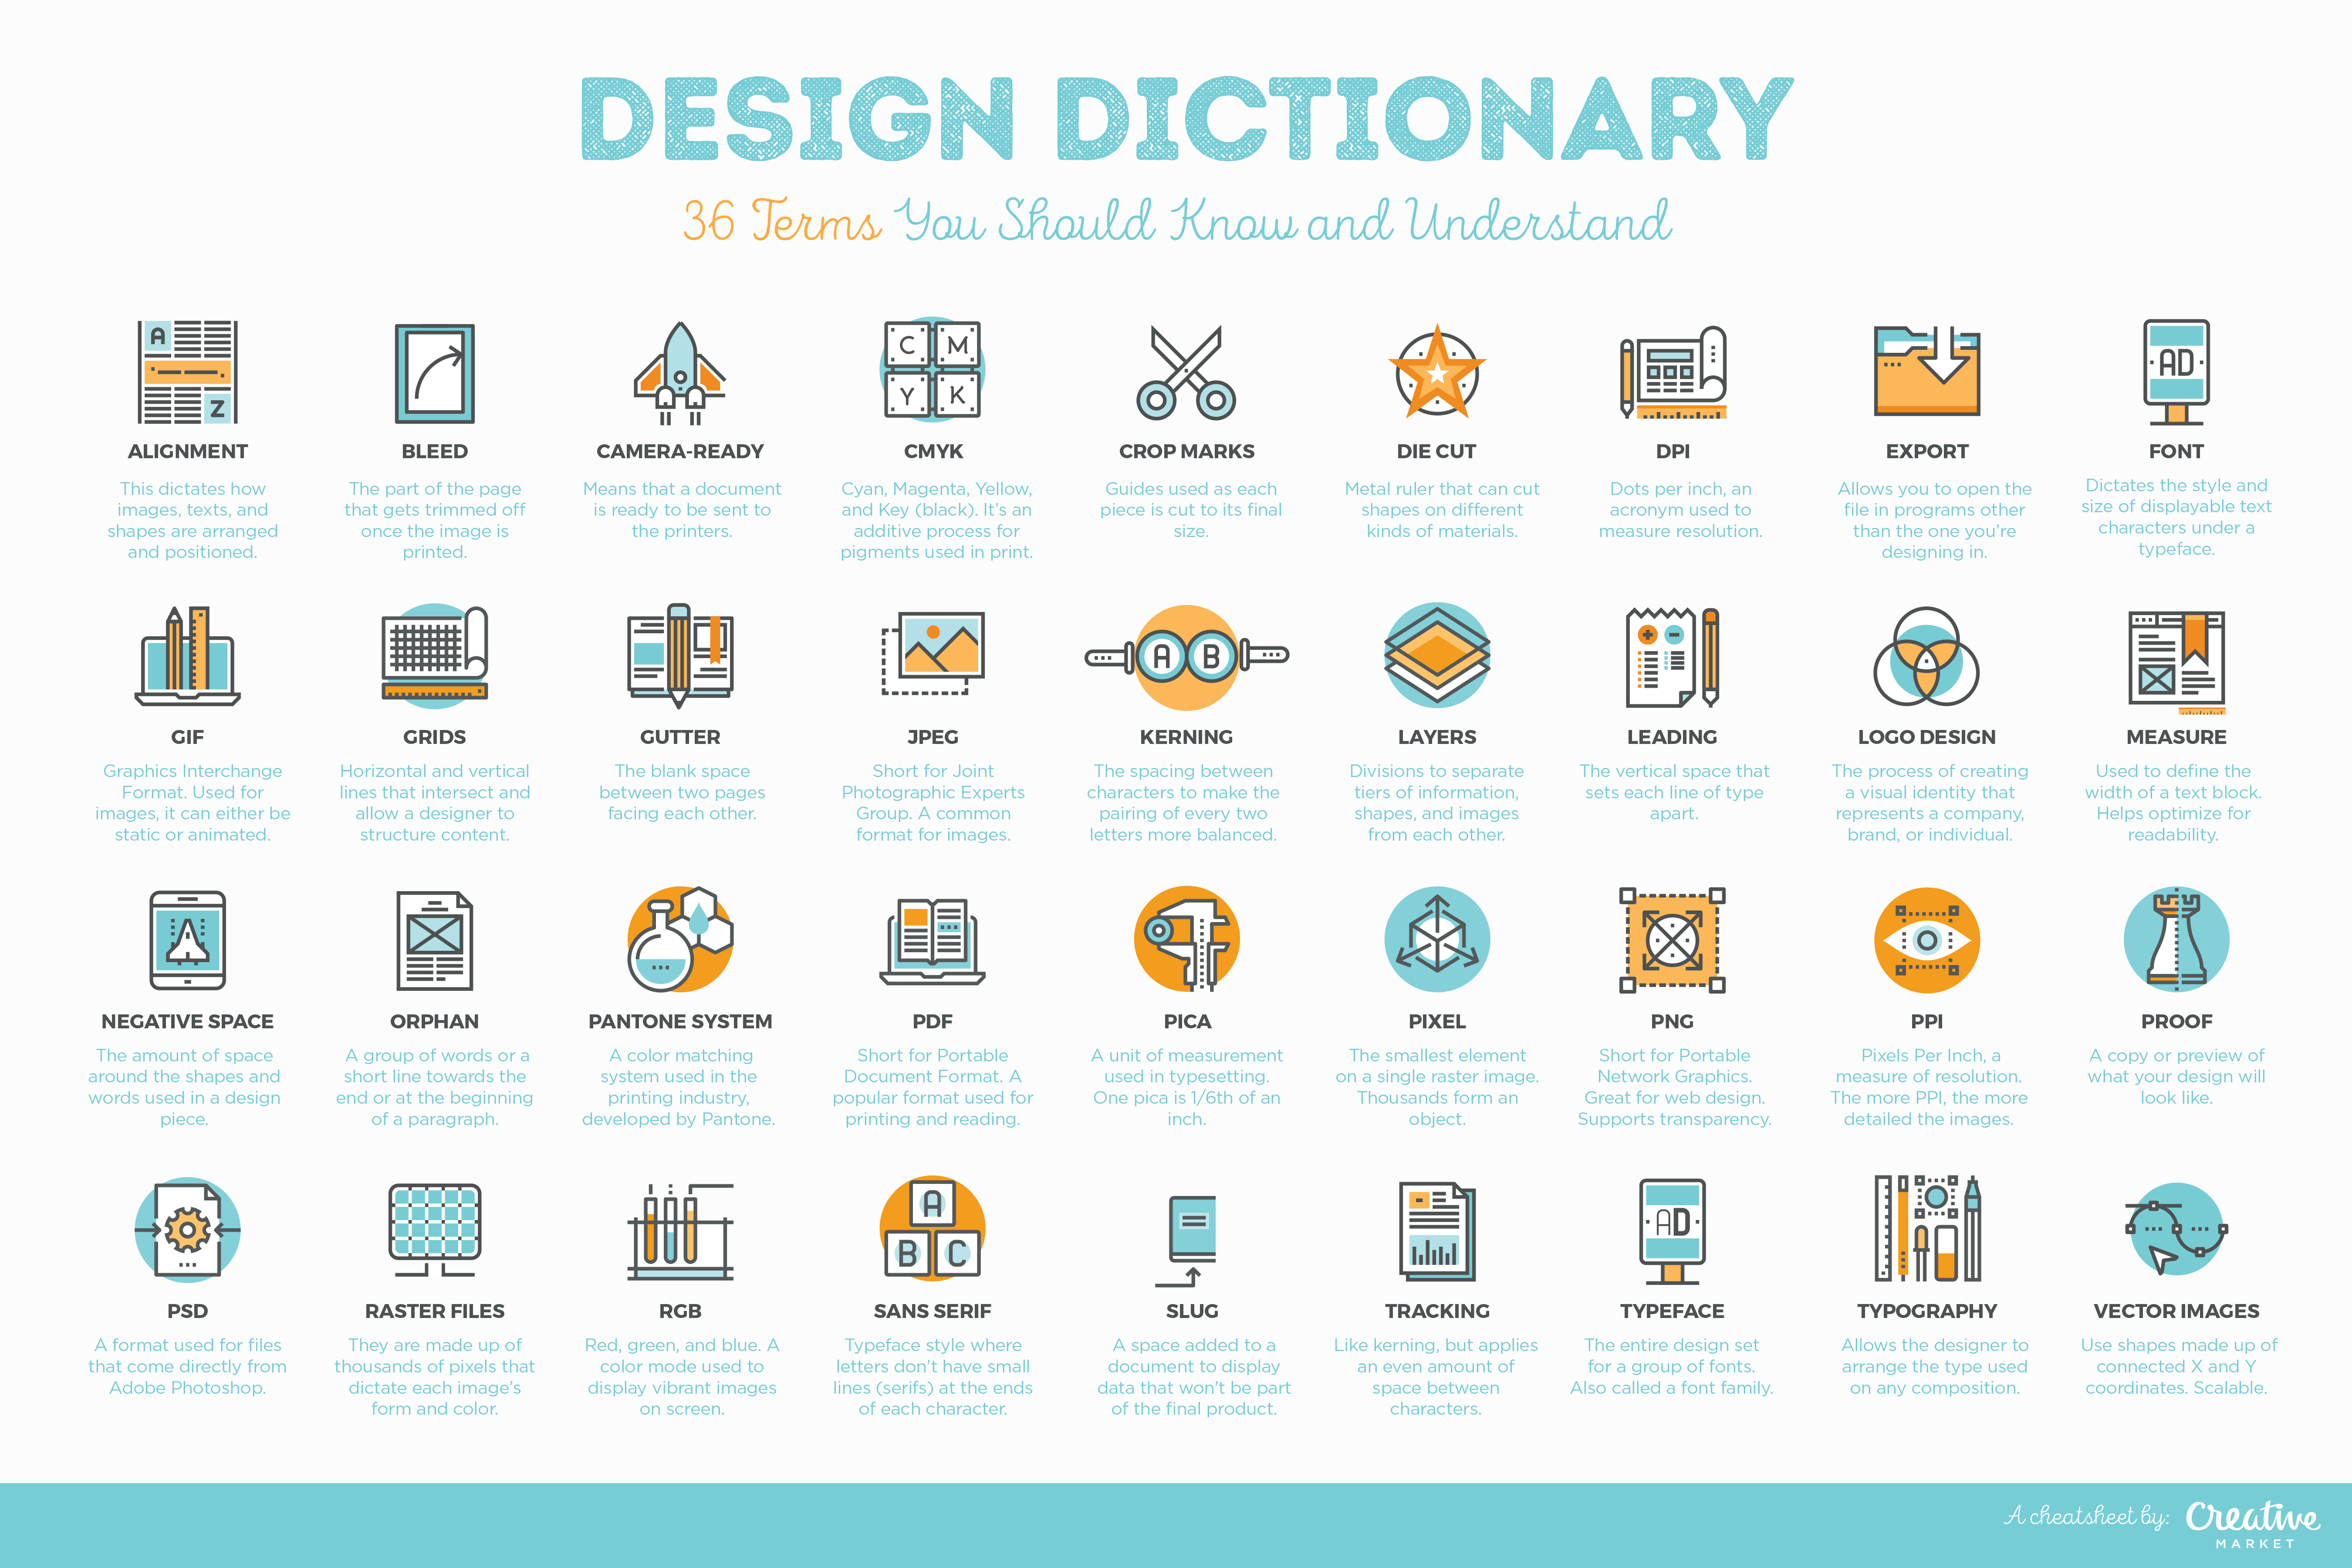 65 Design Terms You Should Know